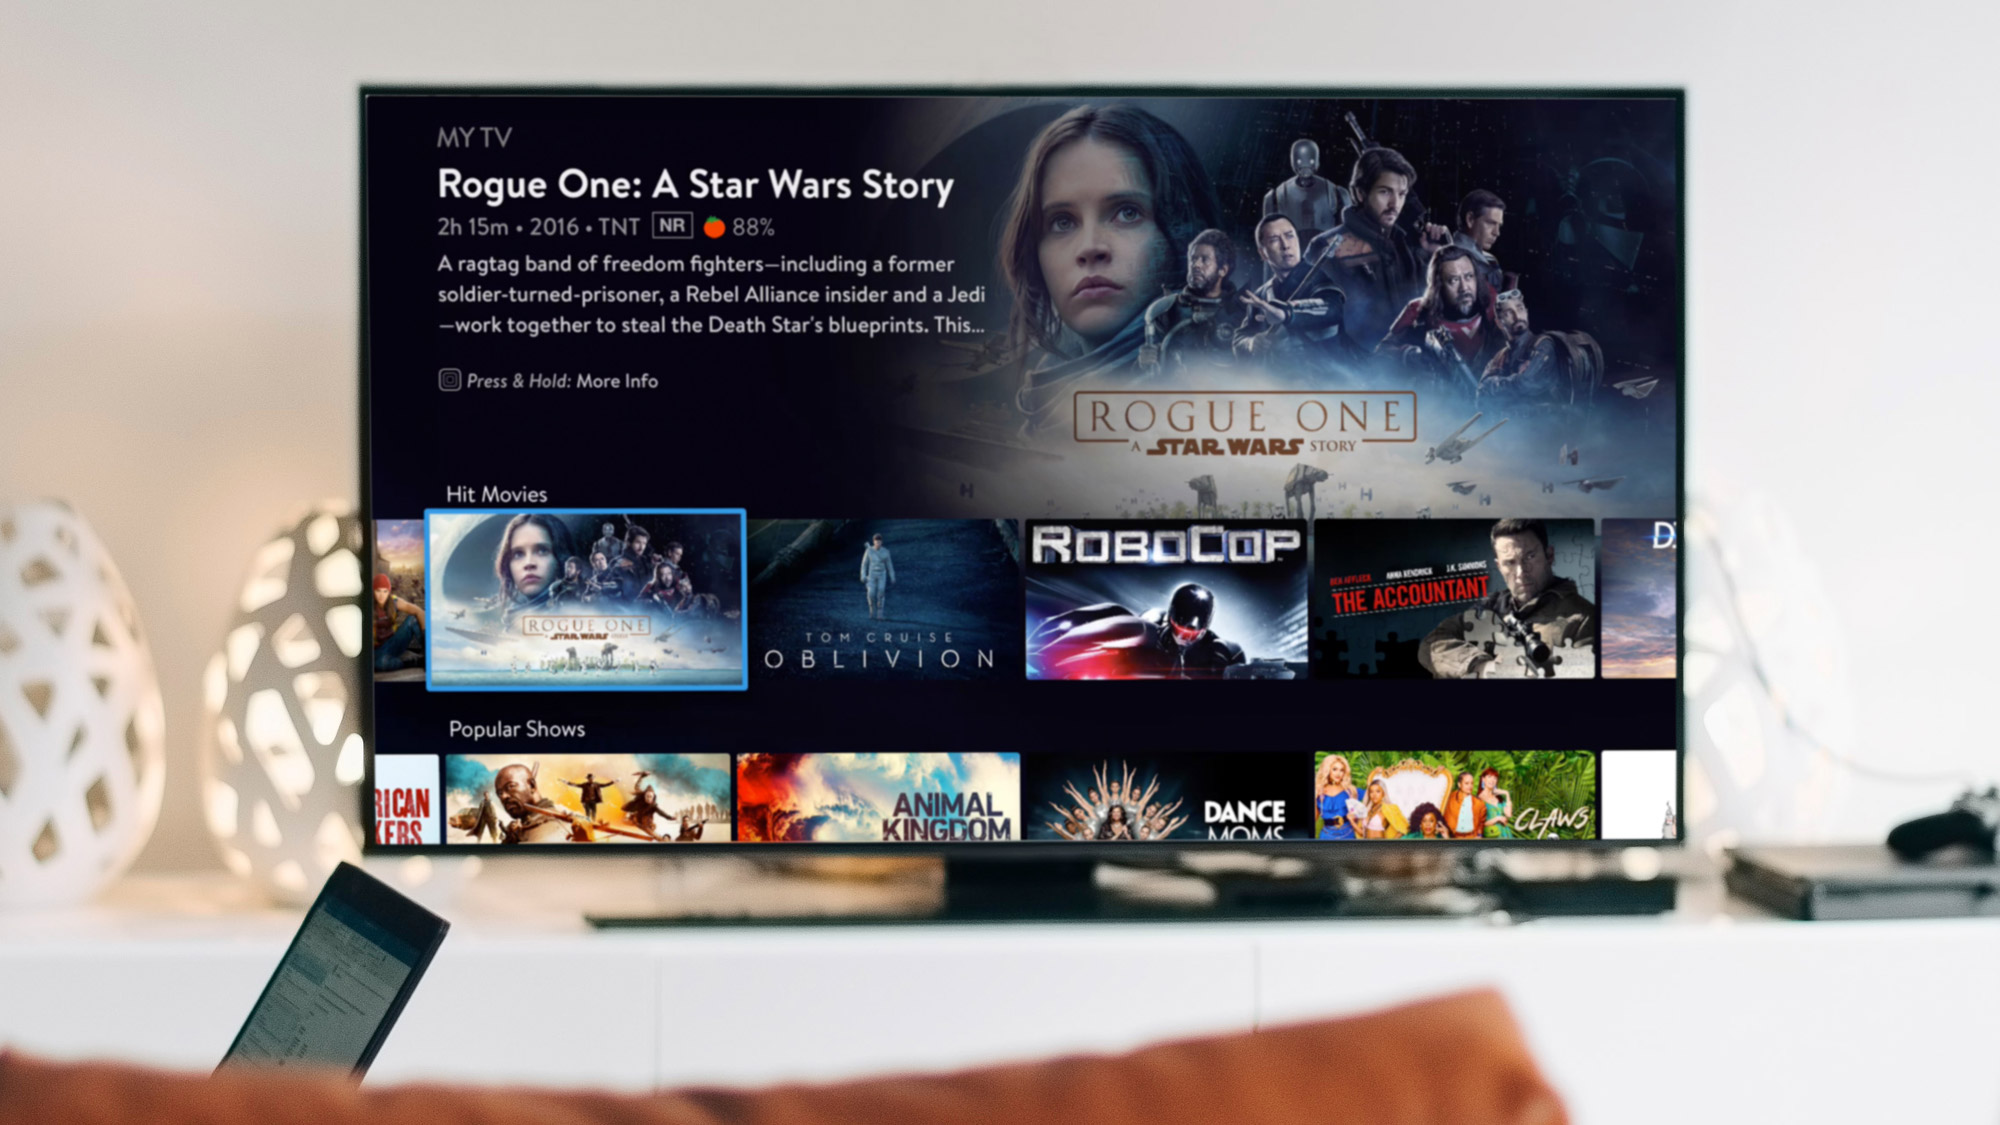 Sling TV, navigated to Rogue One A Star Wars Story, on a TV in a living room